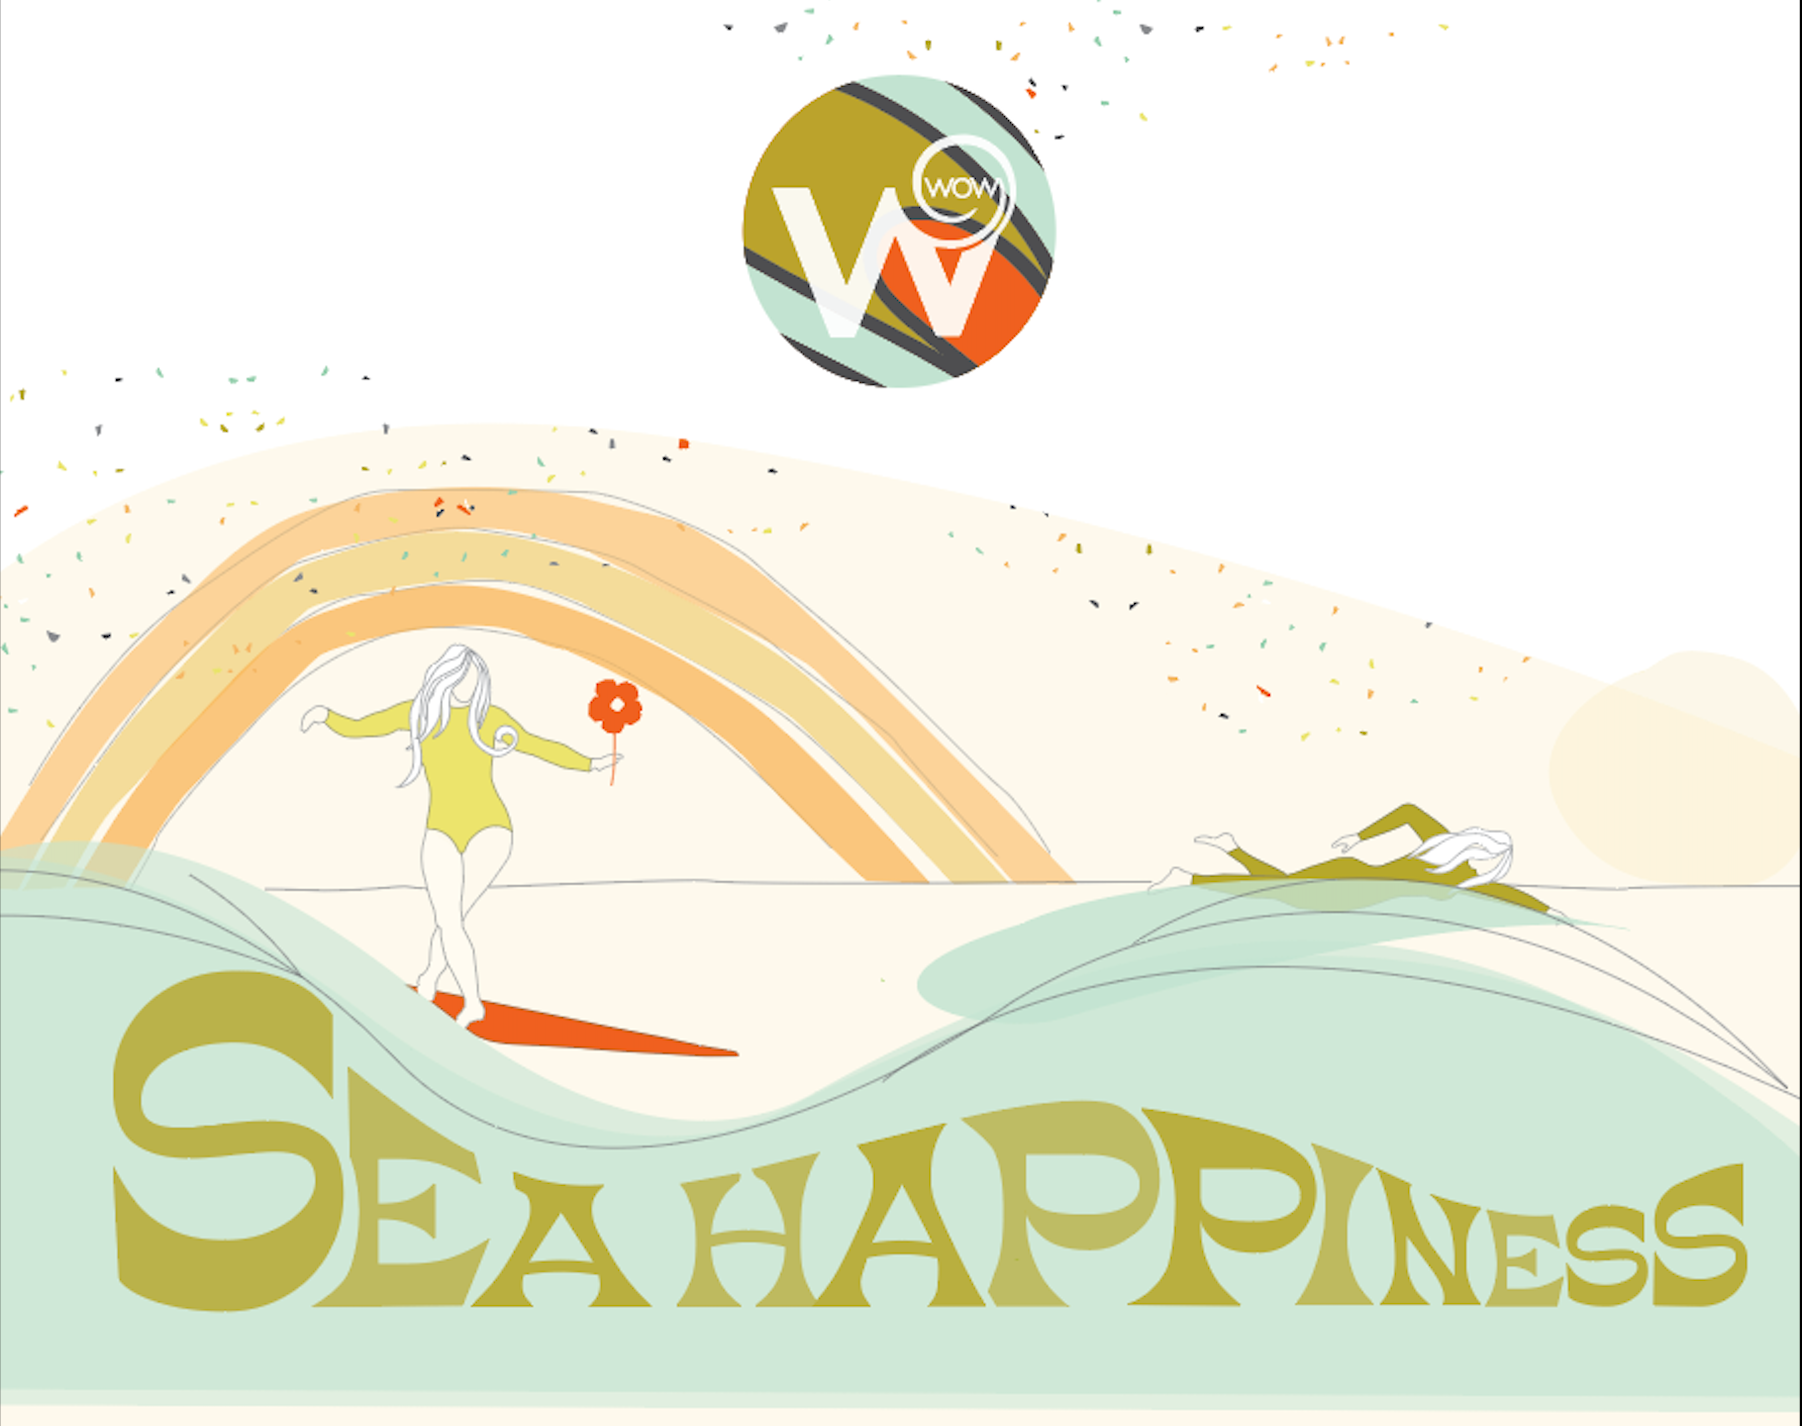 Illustration of woman surfing that reads "Sea Happiness"